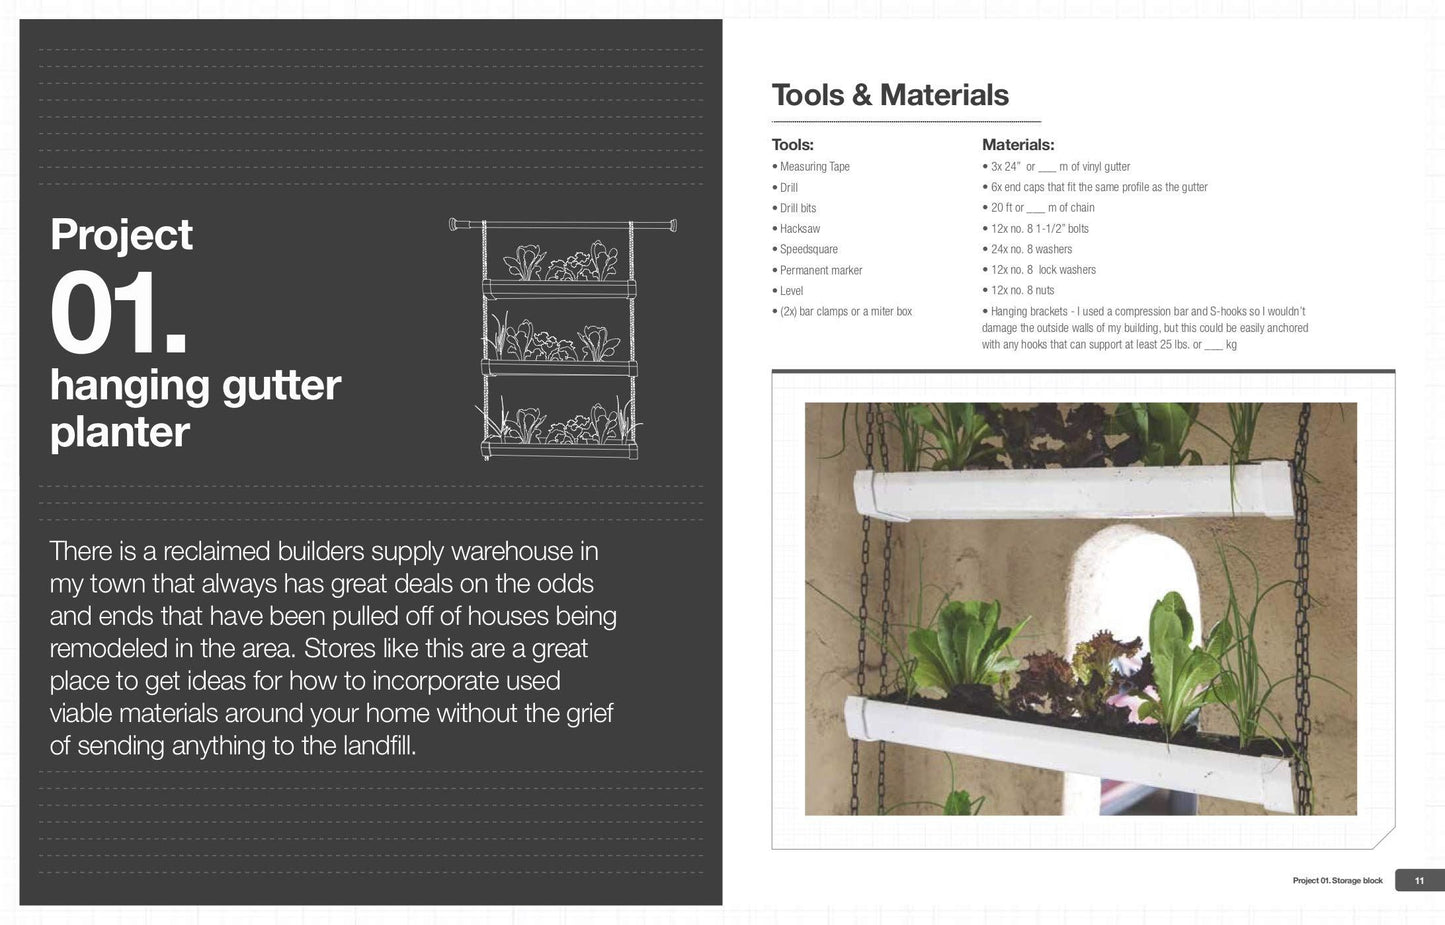 Maker: Sustainable DIY Projects